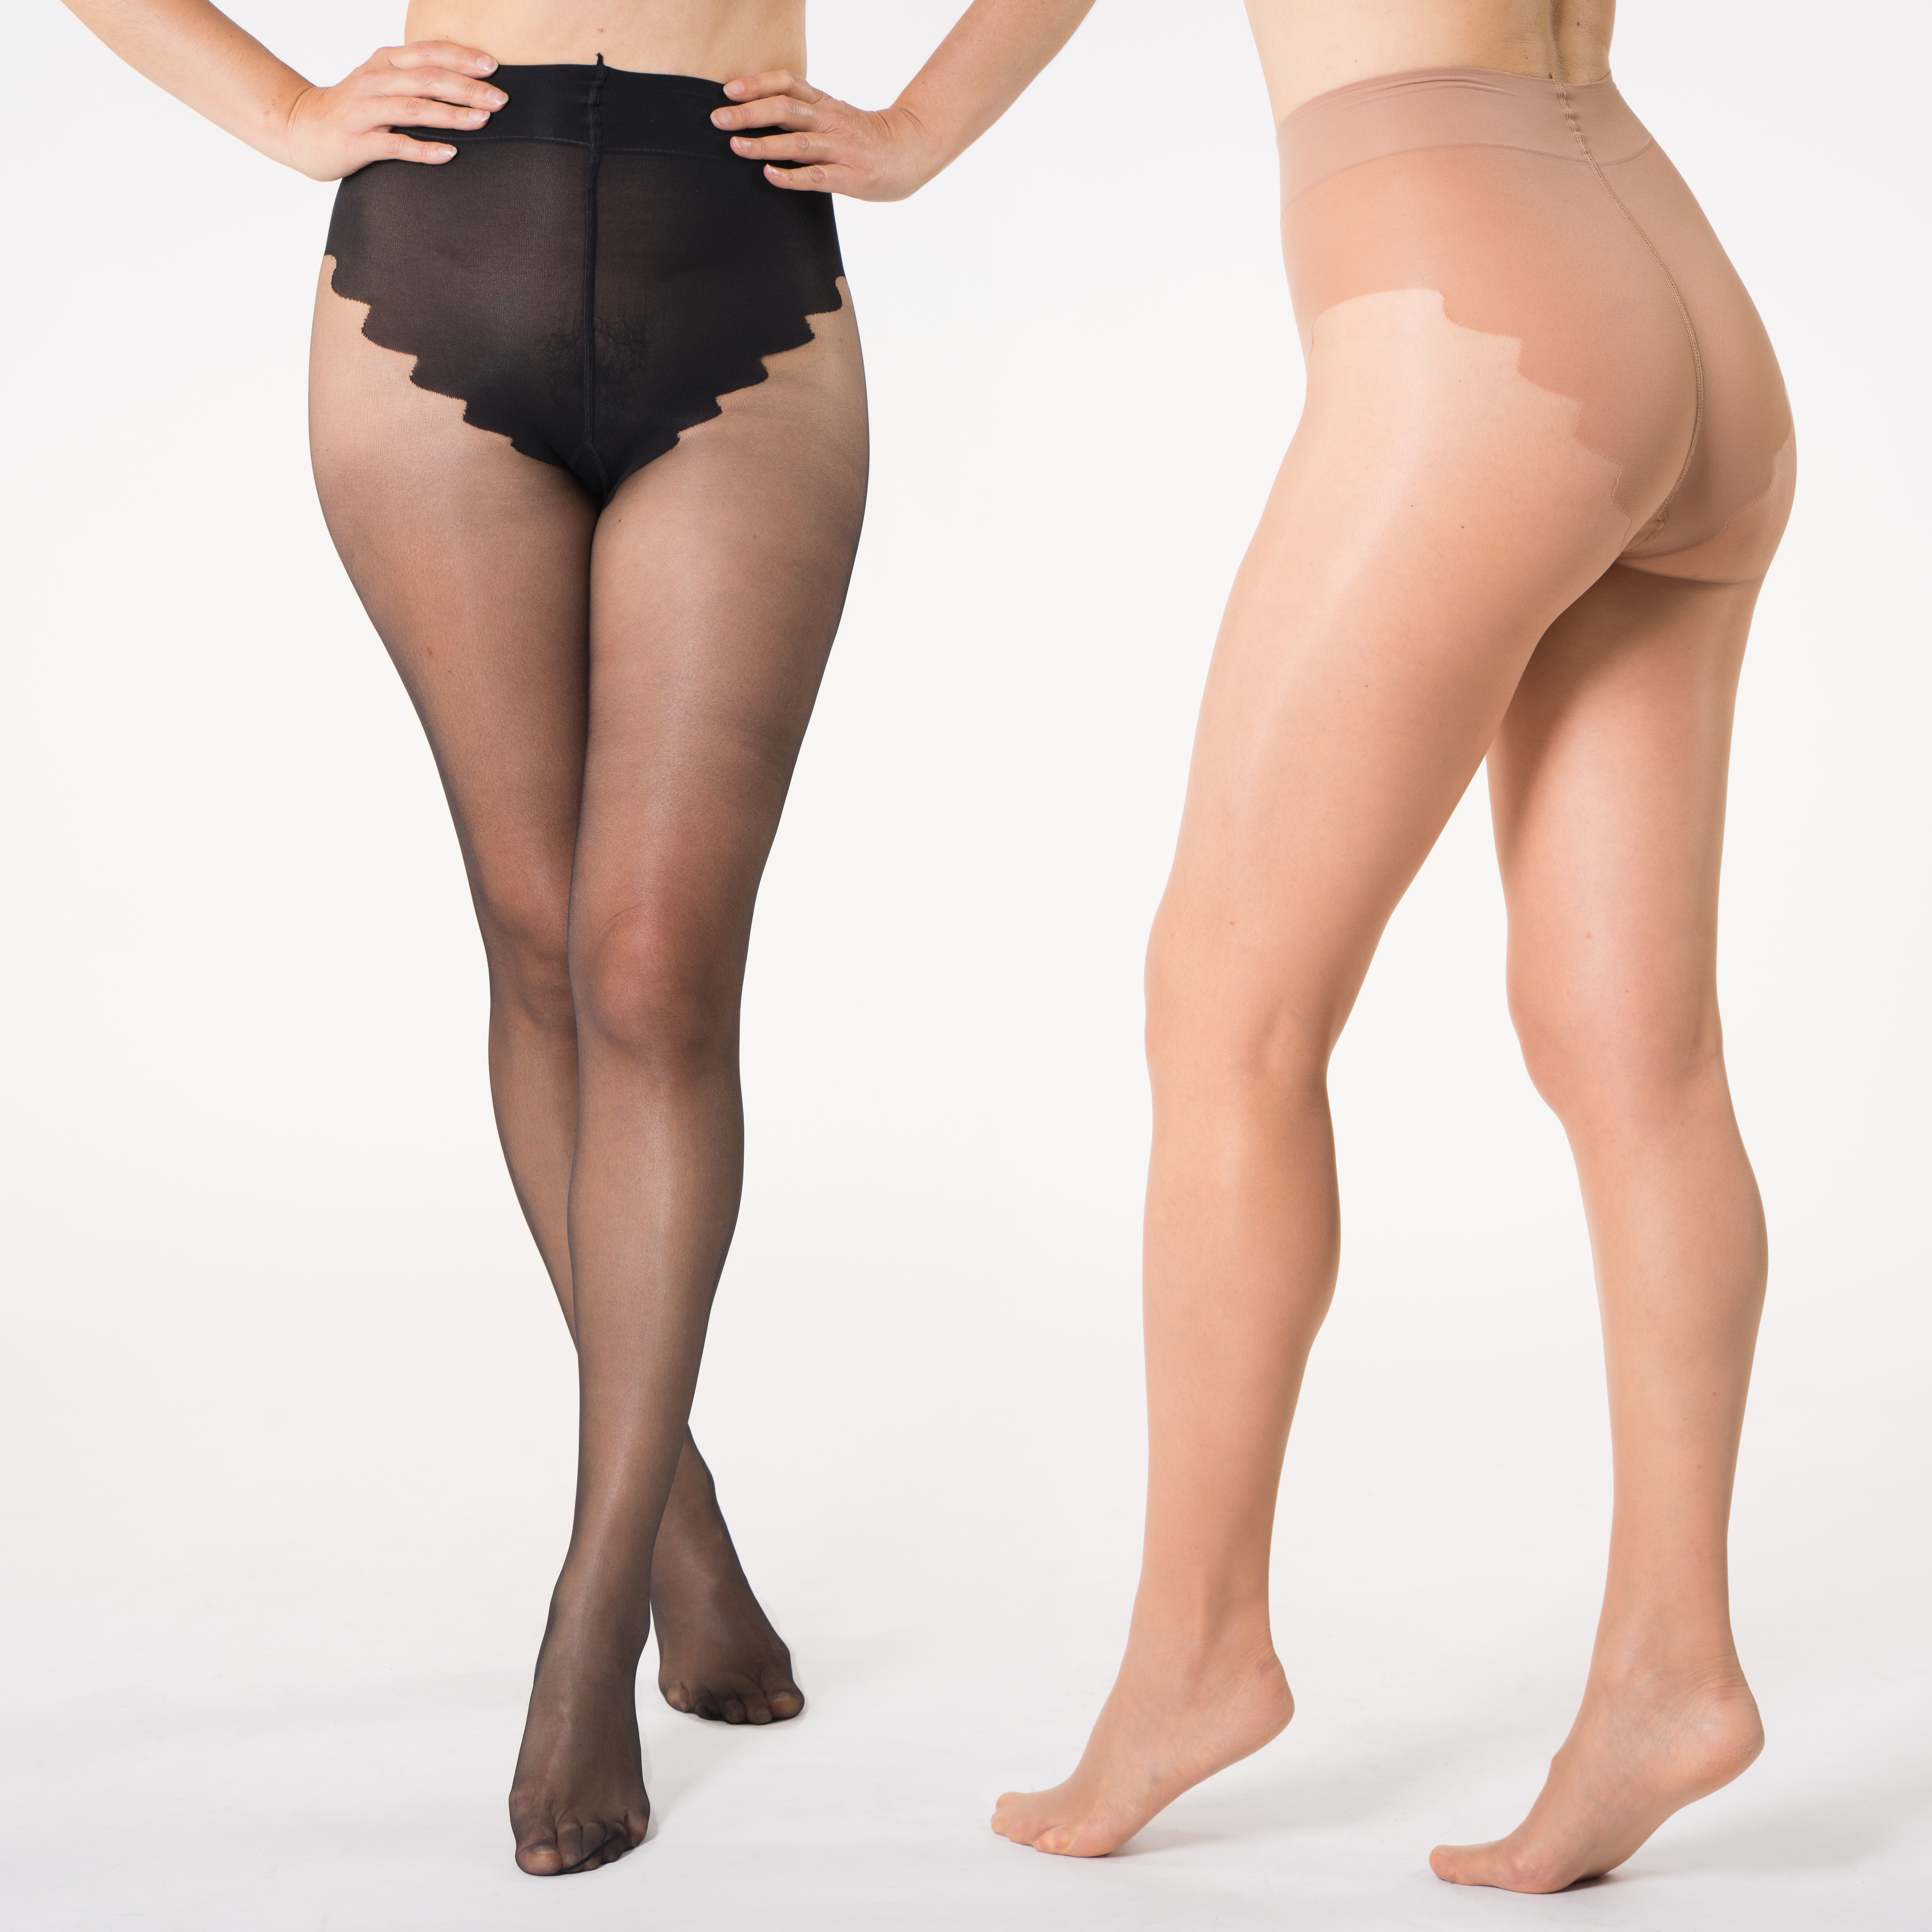 File:Sheer Tights or Pantyhose with low waist top in the colour black -  rear view.jpg - Wikimedia Commons